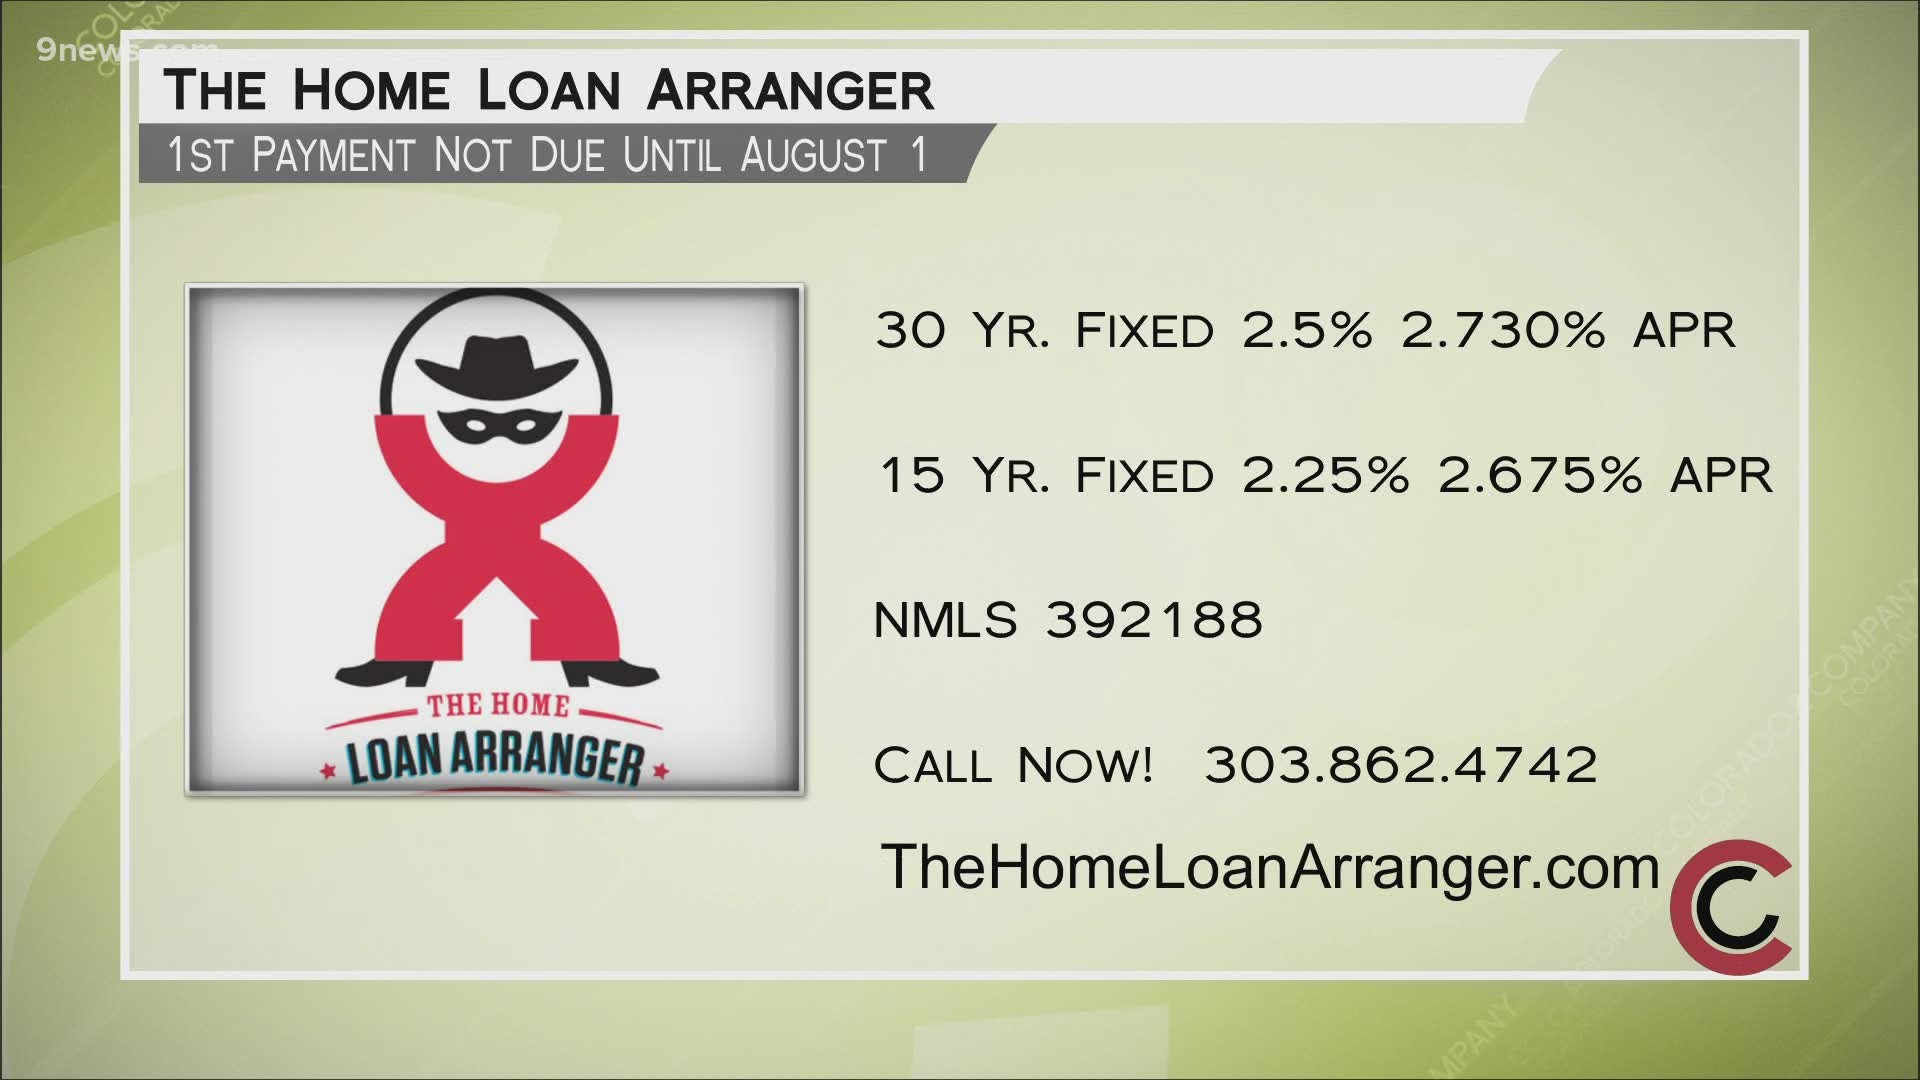 Call 303.862.4742 to get started on a home refinance that can save you money fast. Close your loan in as little as 10 days! Visit TheHomeLoanArranger.com for more.